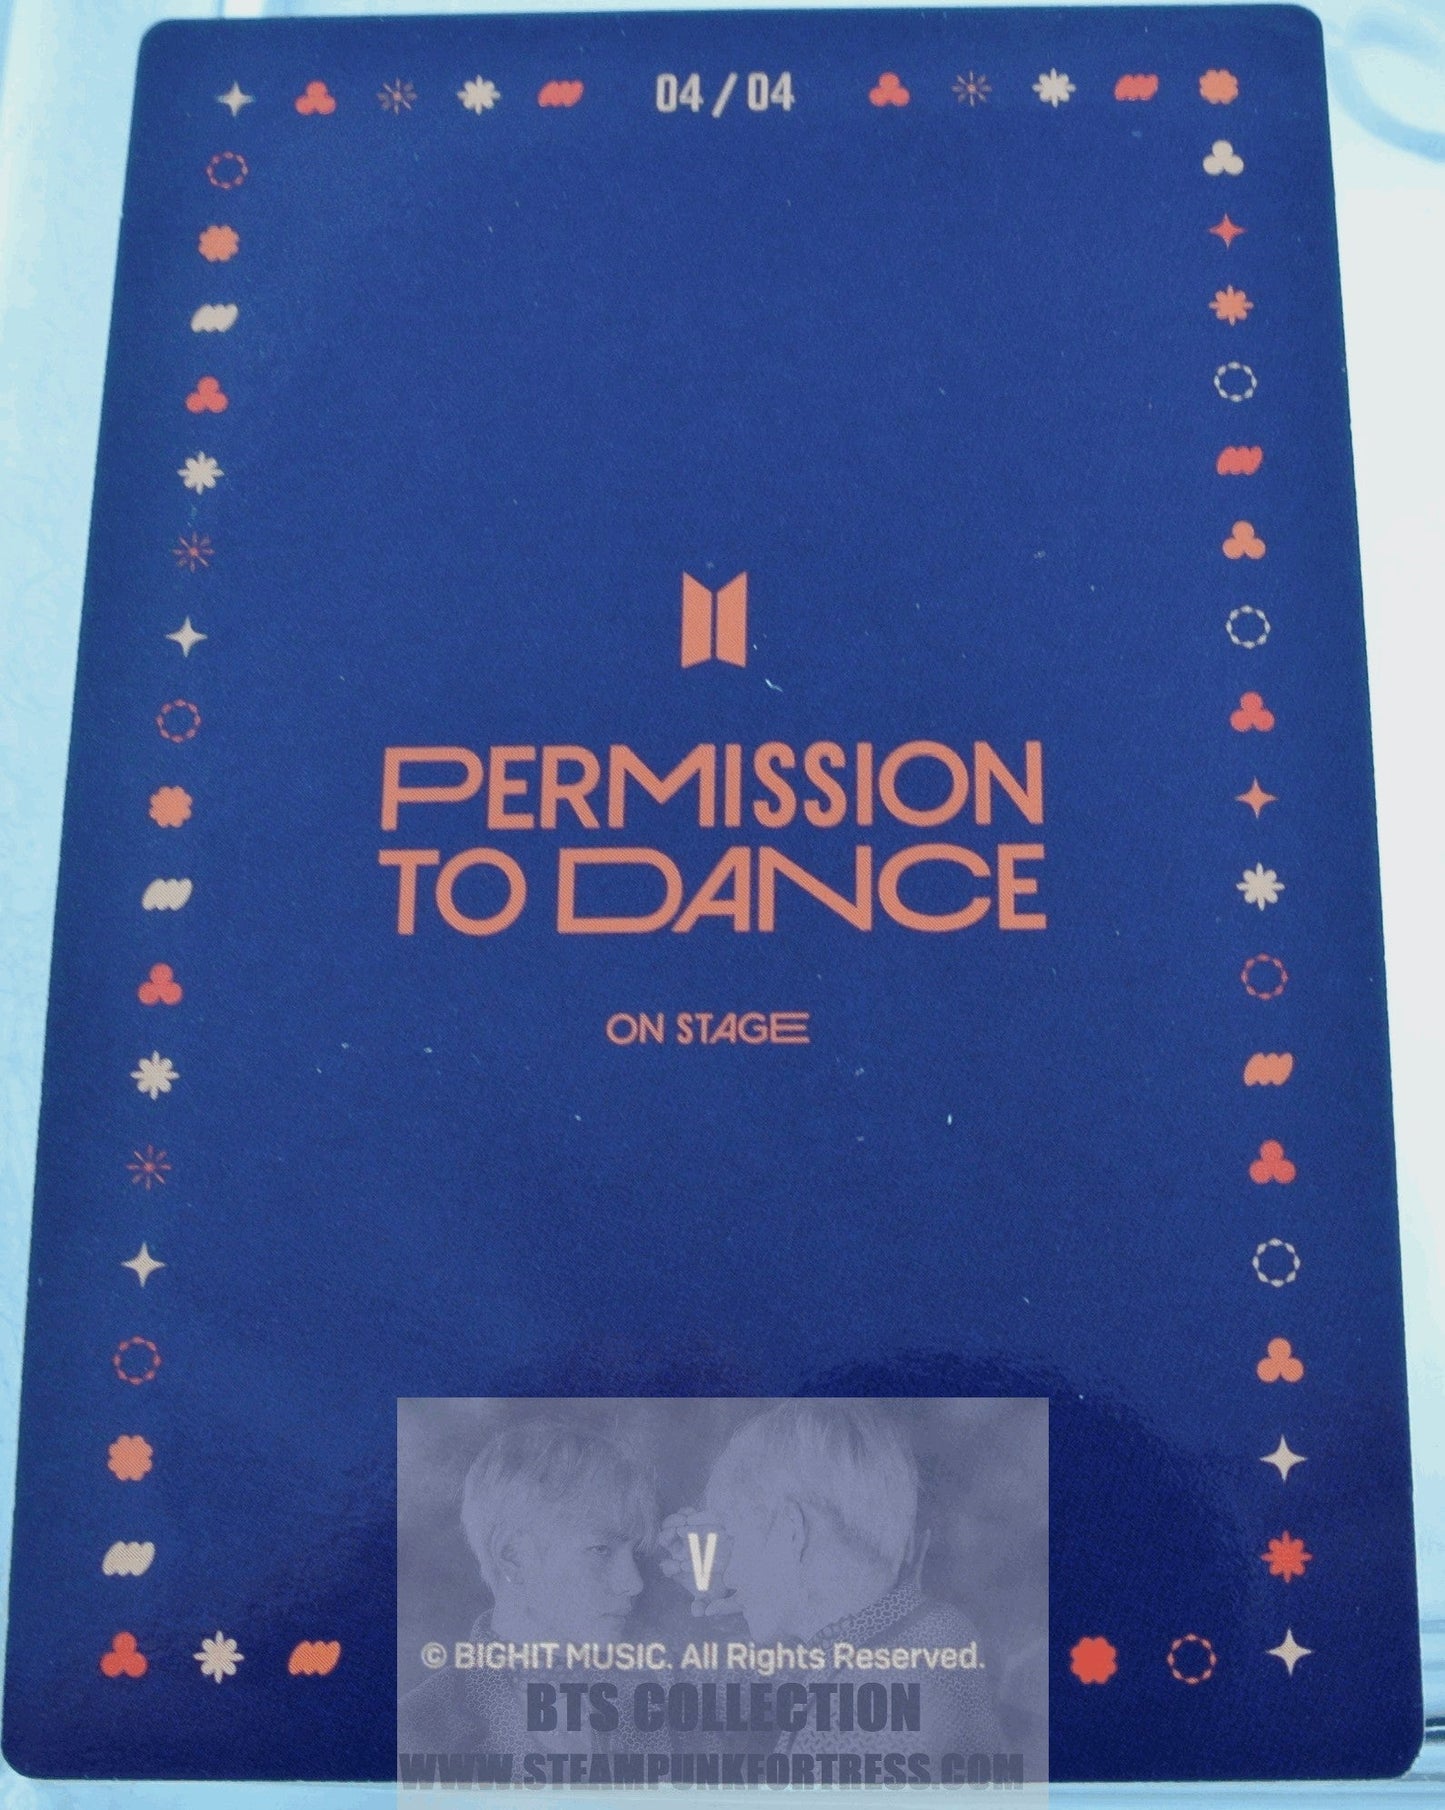 BTS V KIM TAEHYUNG TAE-HYUNG PTD 2022 PERMISSION TO DANCE ON STAGE SEOUL PTD #4 OF 4 PHOTOCARD PHOTO CARD NEW OFFICIAL MERCHANDISE